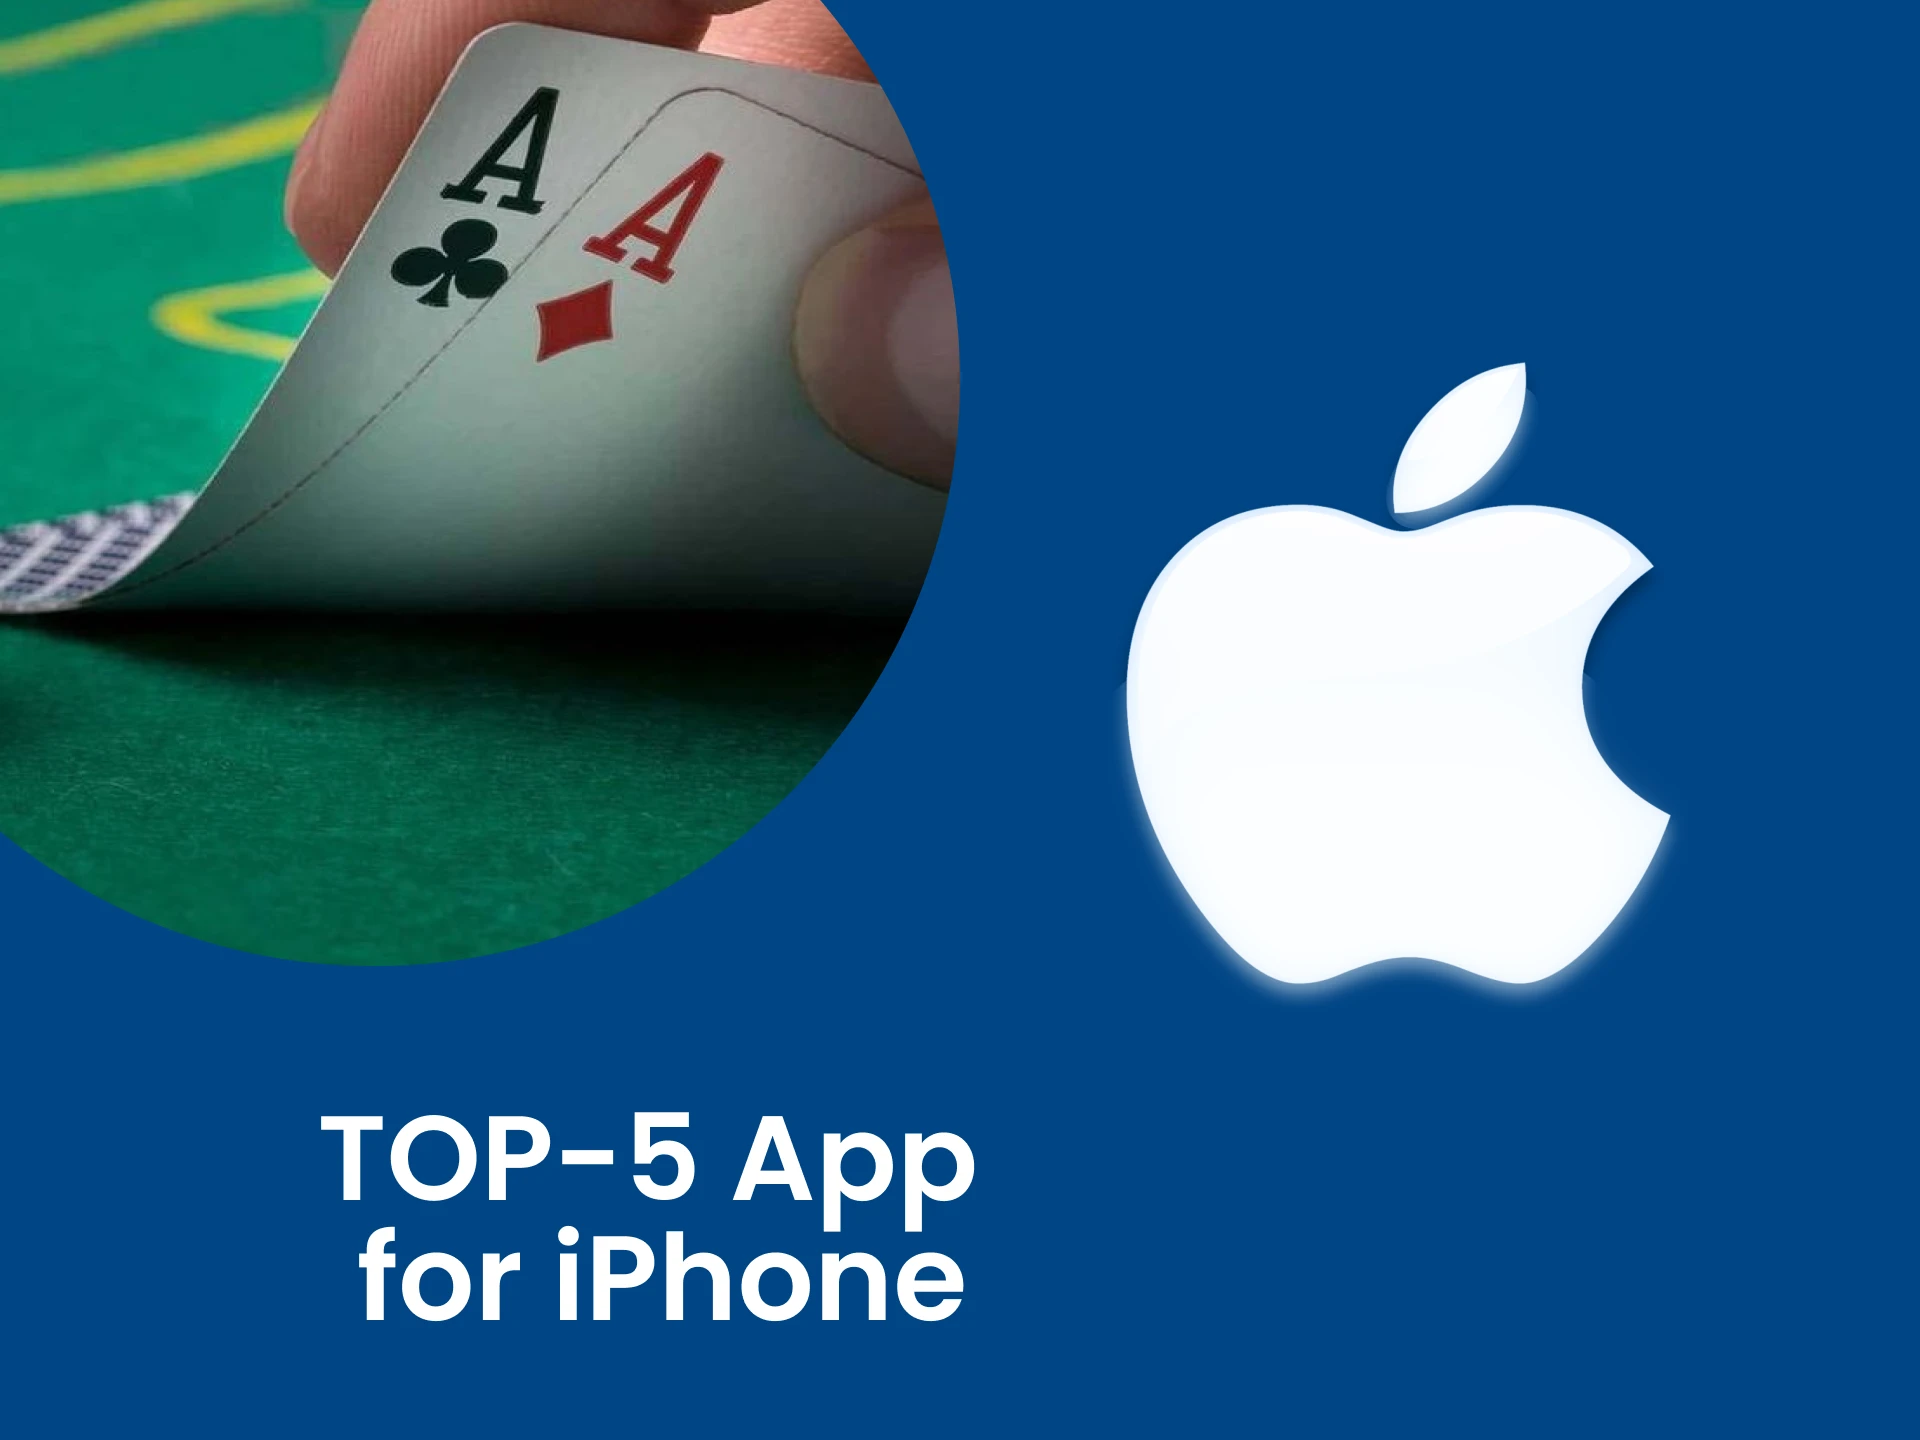 We will tell you about the best applications for playing BlackJack on iPhone.